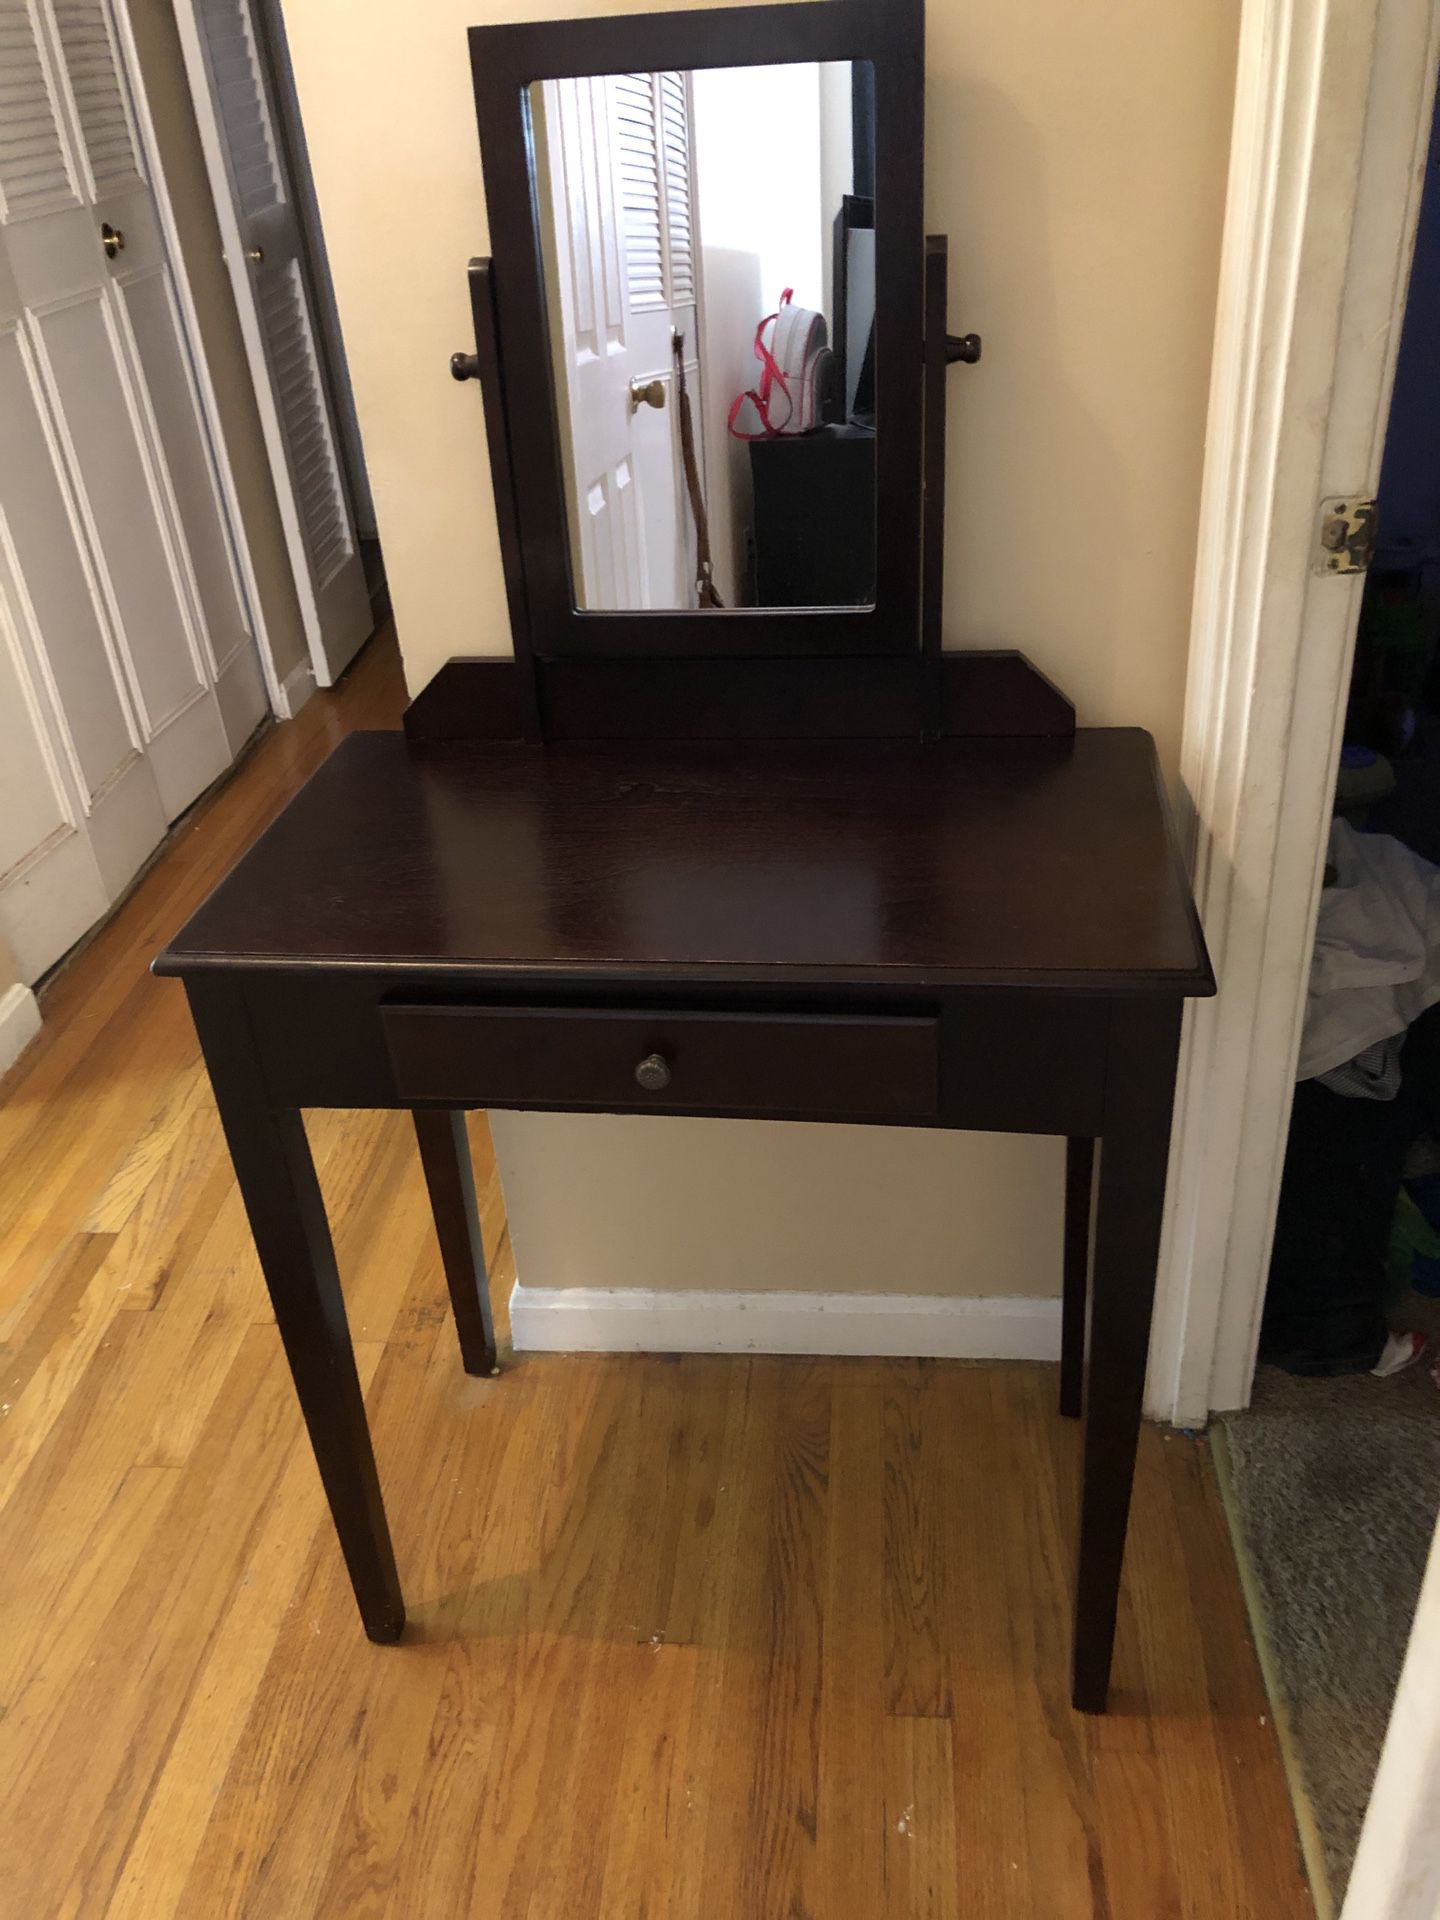 Cherry wood vanity set with attached mirror and pull out drawer. Excellent condition. Will sell with bench seat (needs a couple screws in one leg) I